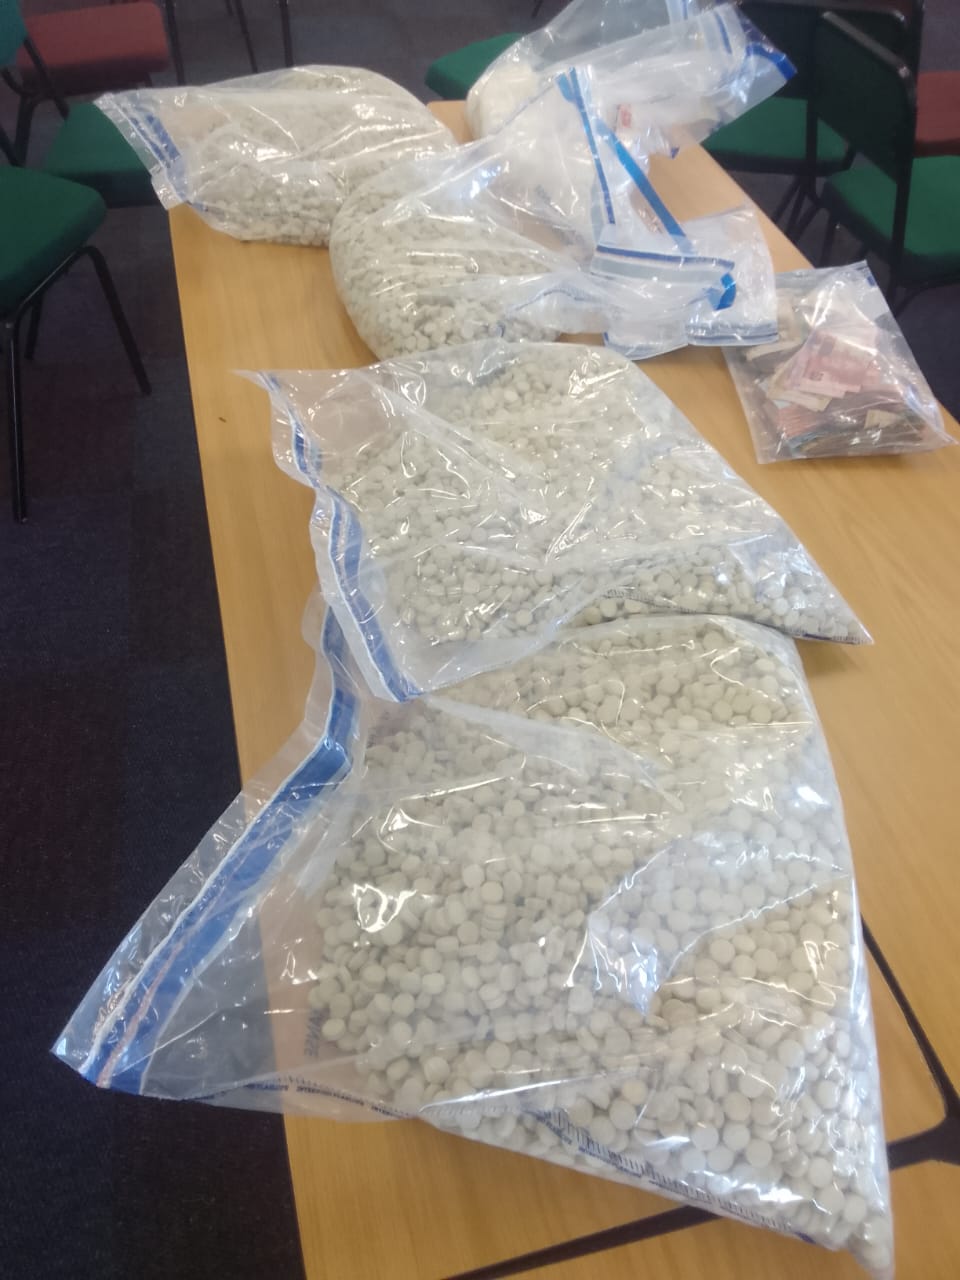 Nigerian man arrested with R1.2 million worth of drugs in Cape Town